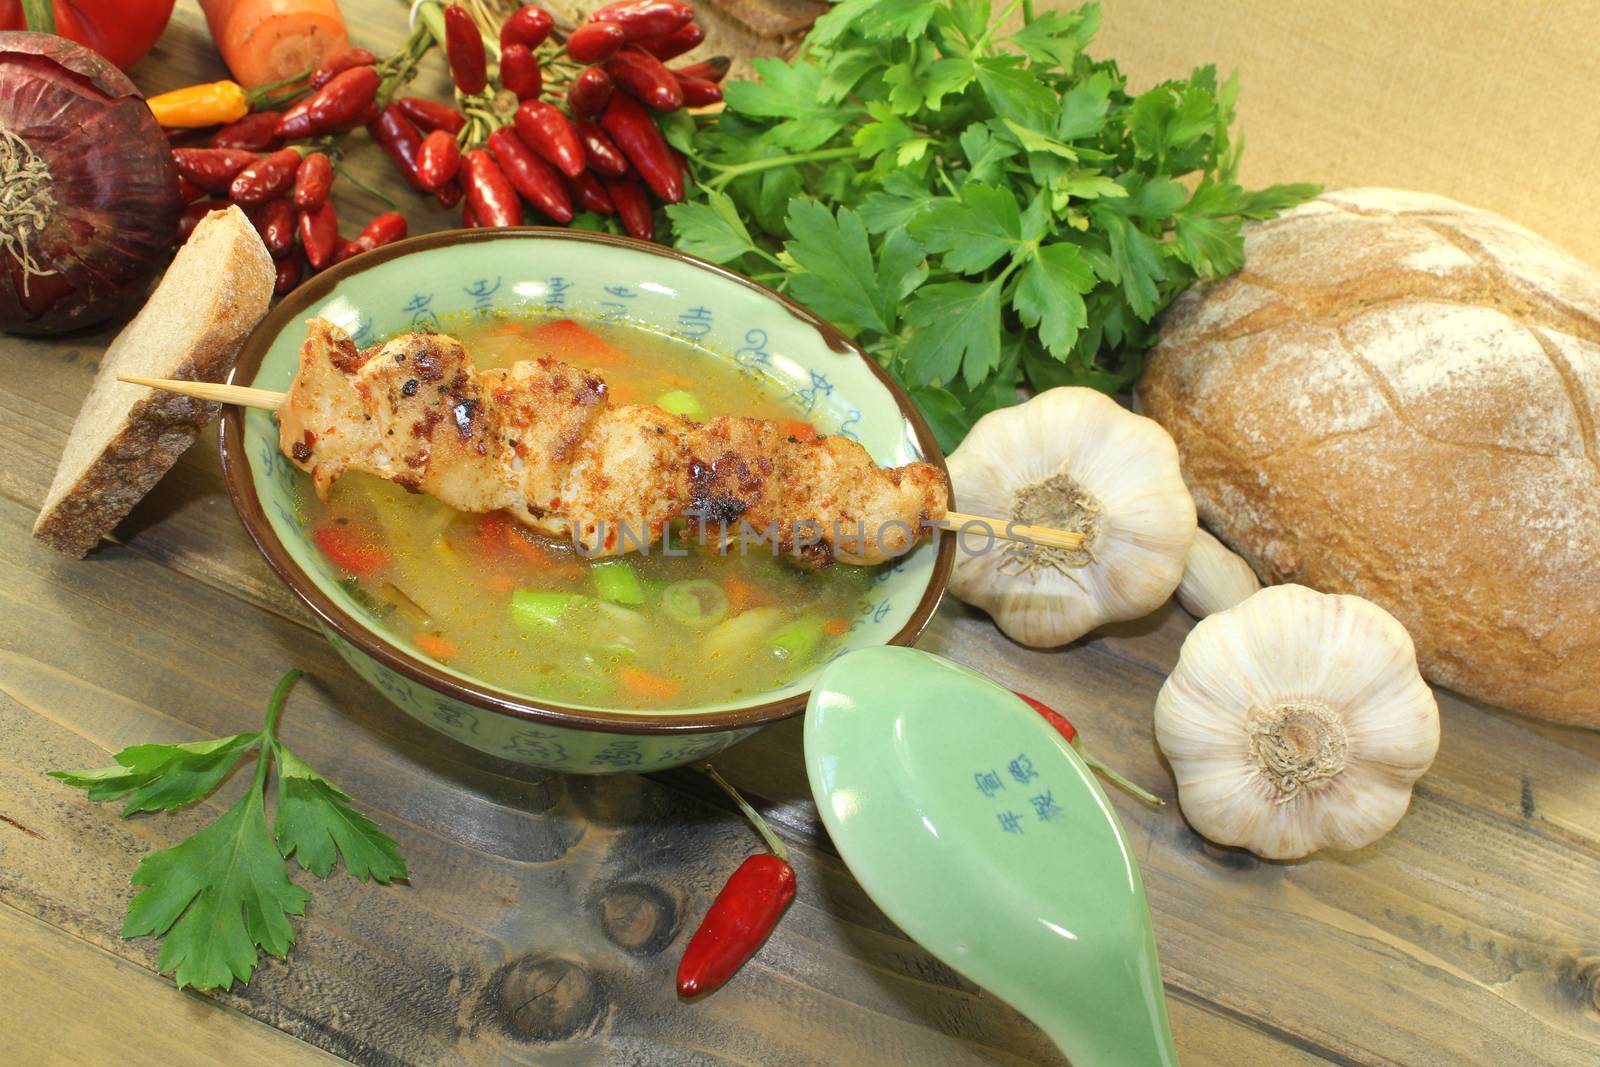 Poultry consomme with chicken skewer, vegetables and parsley